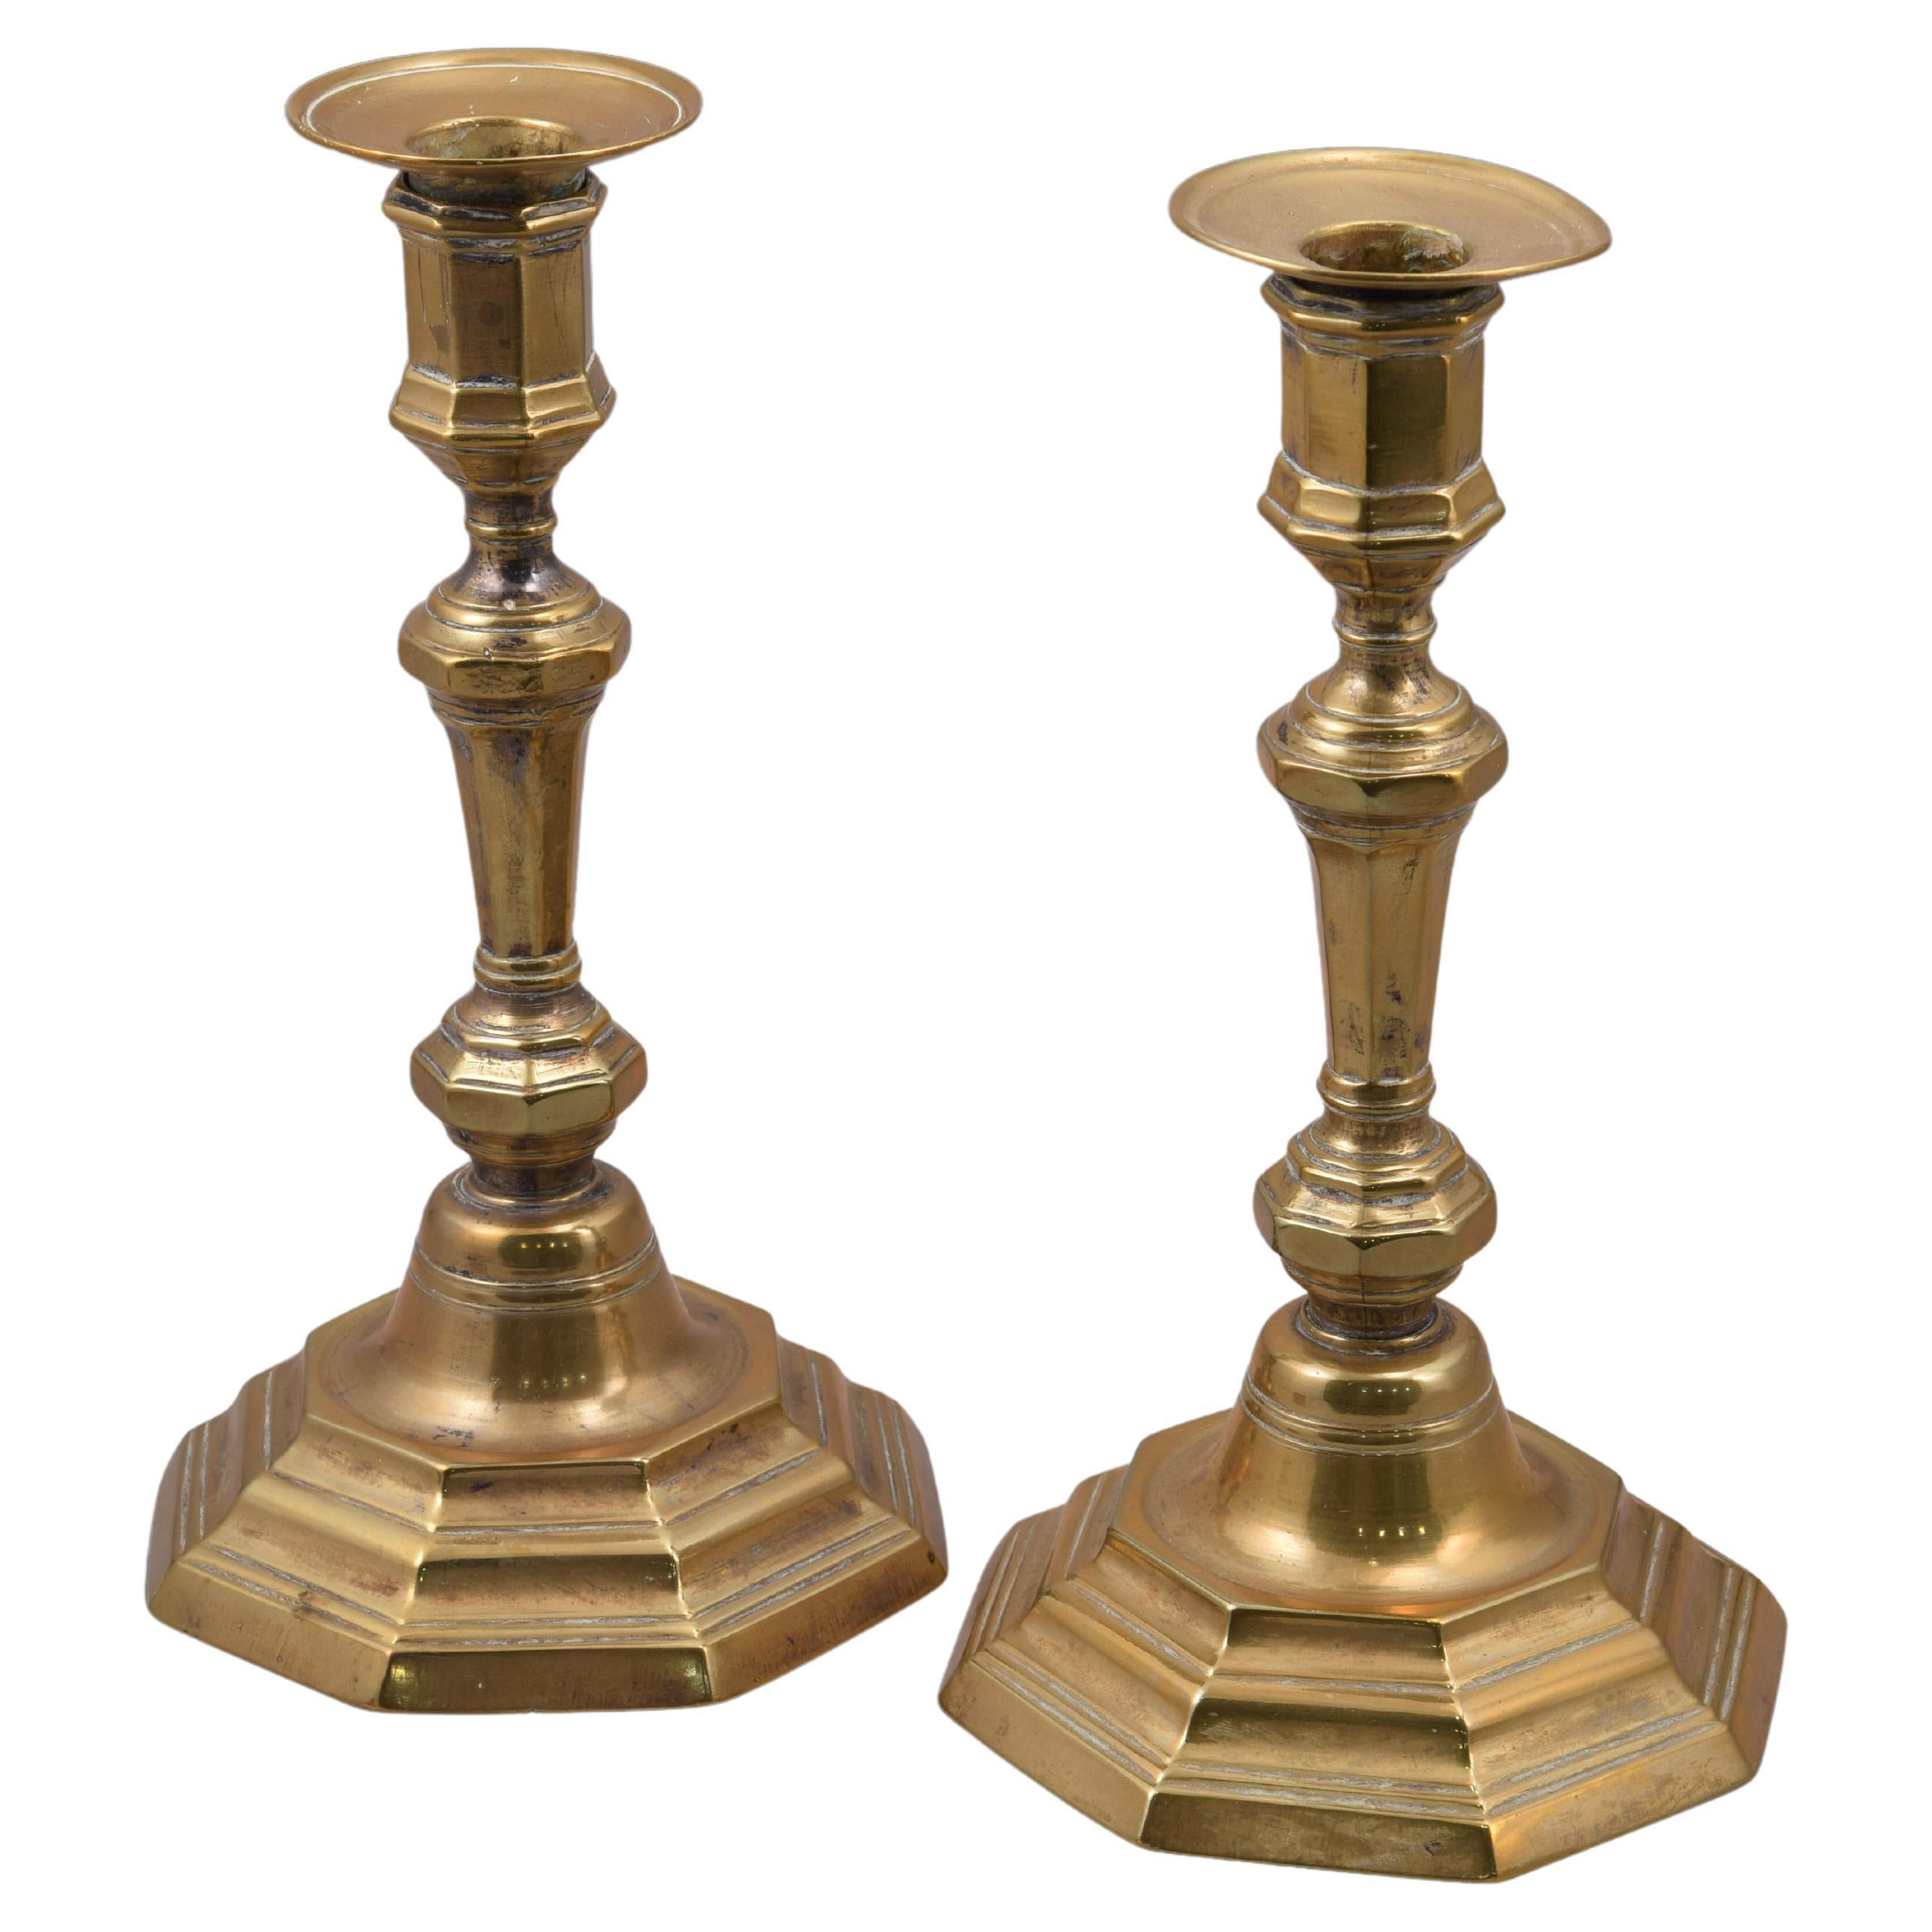 Pair of candlesticks or candle holders. Bronze. 18th century.